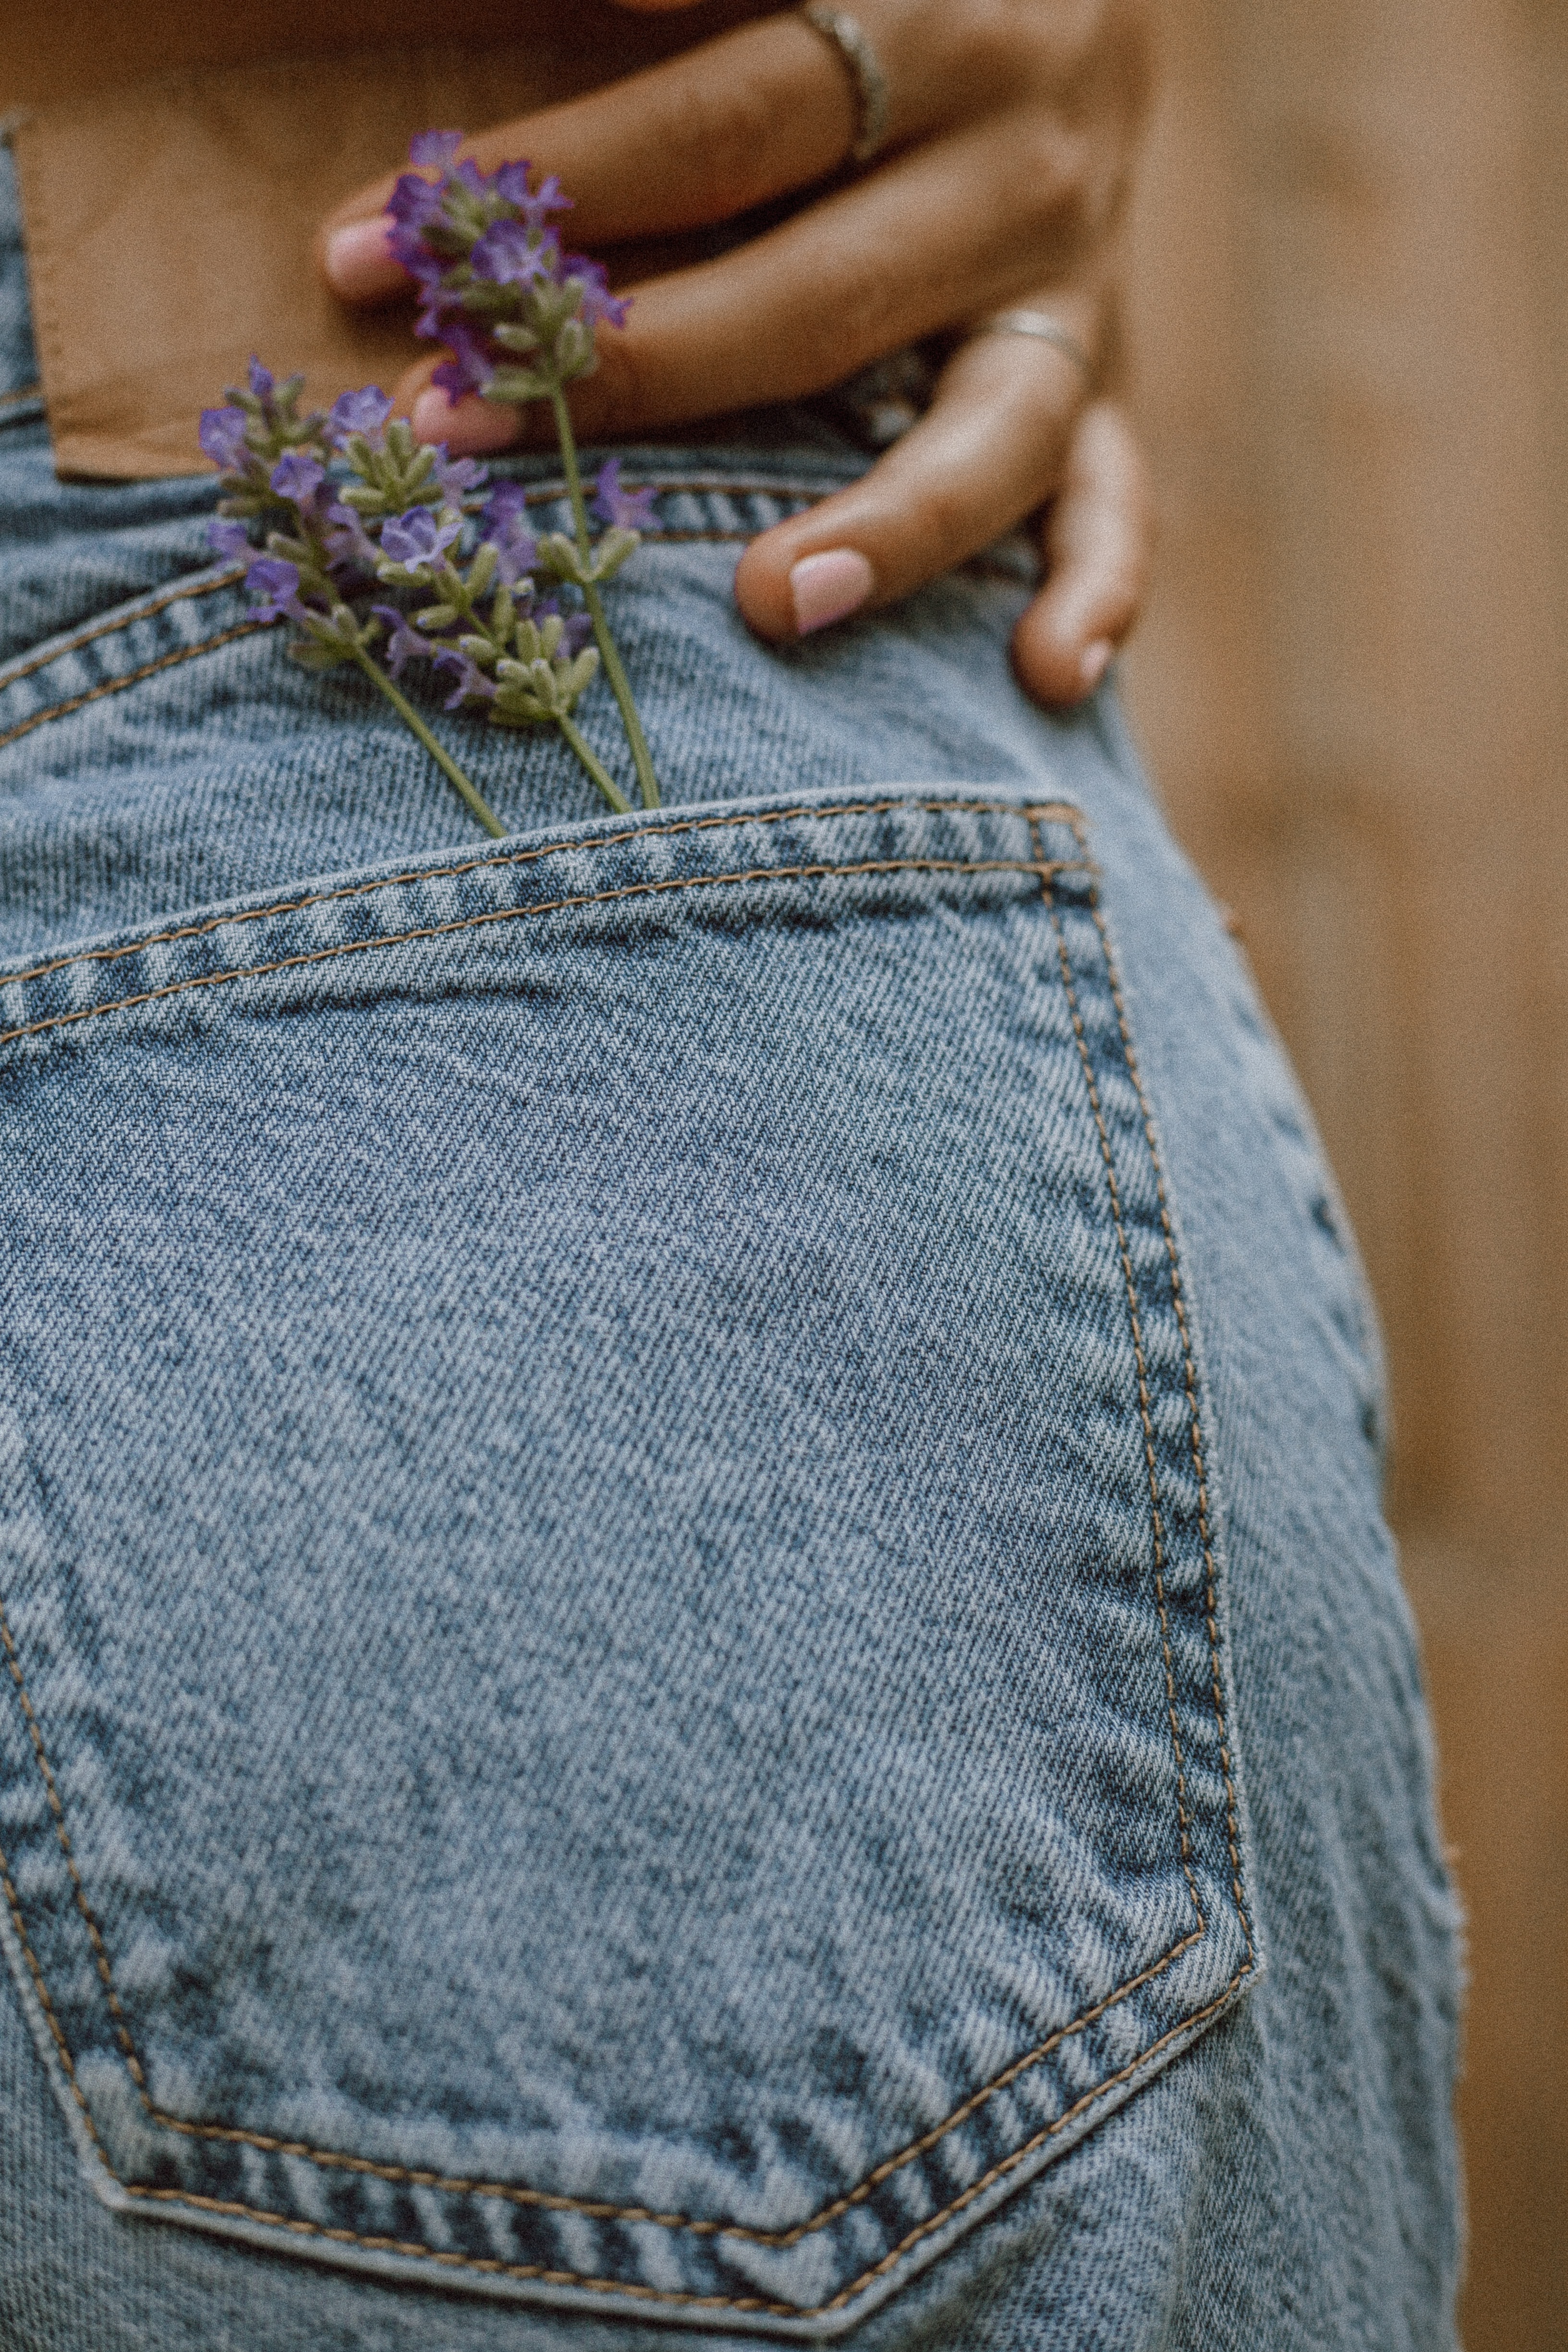 Free HD flowers, hand, miscellanea, miscellaneous, ring, jeans, pocket